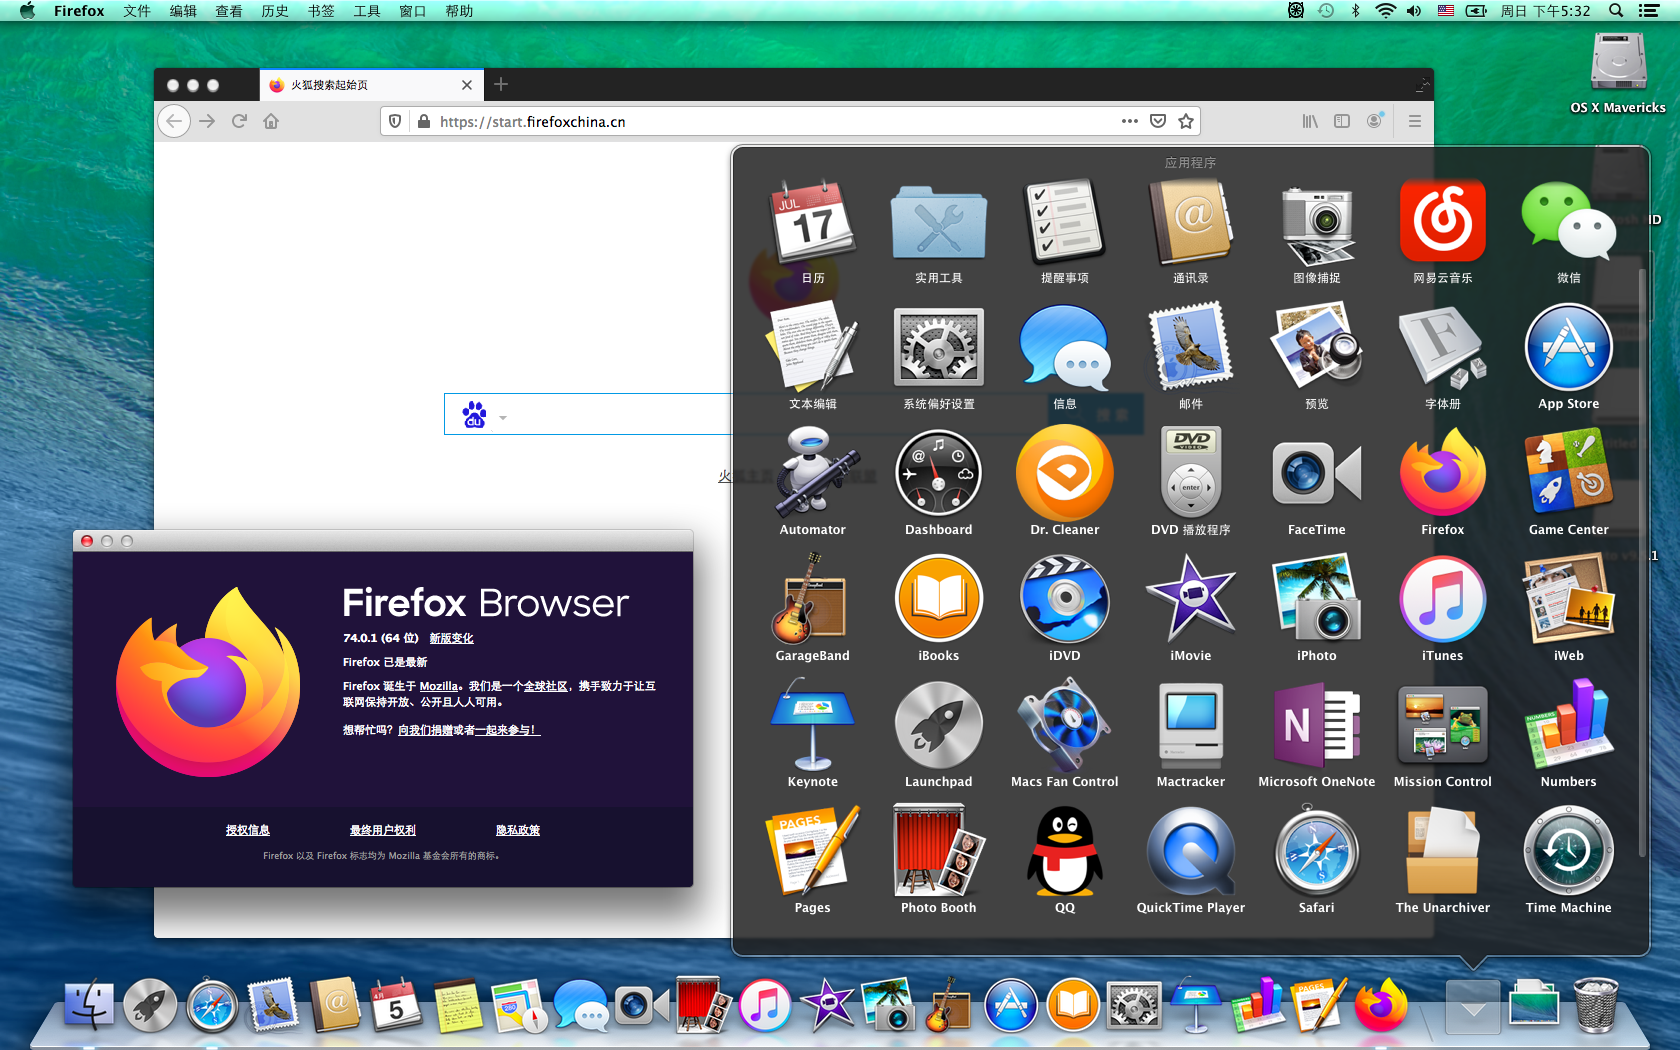 iphoto for mac os x 10.6